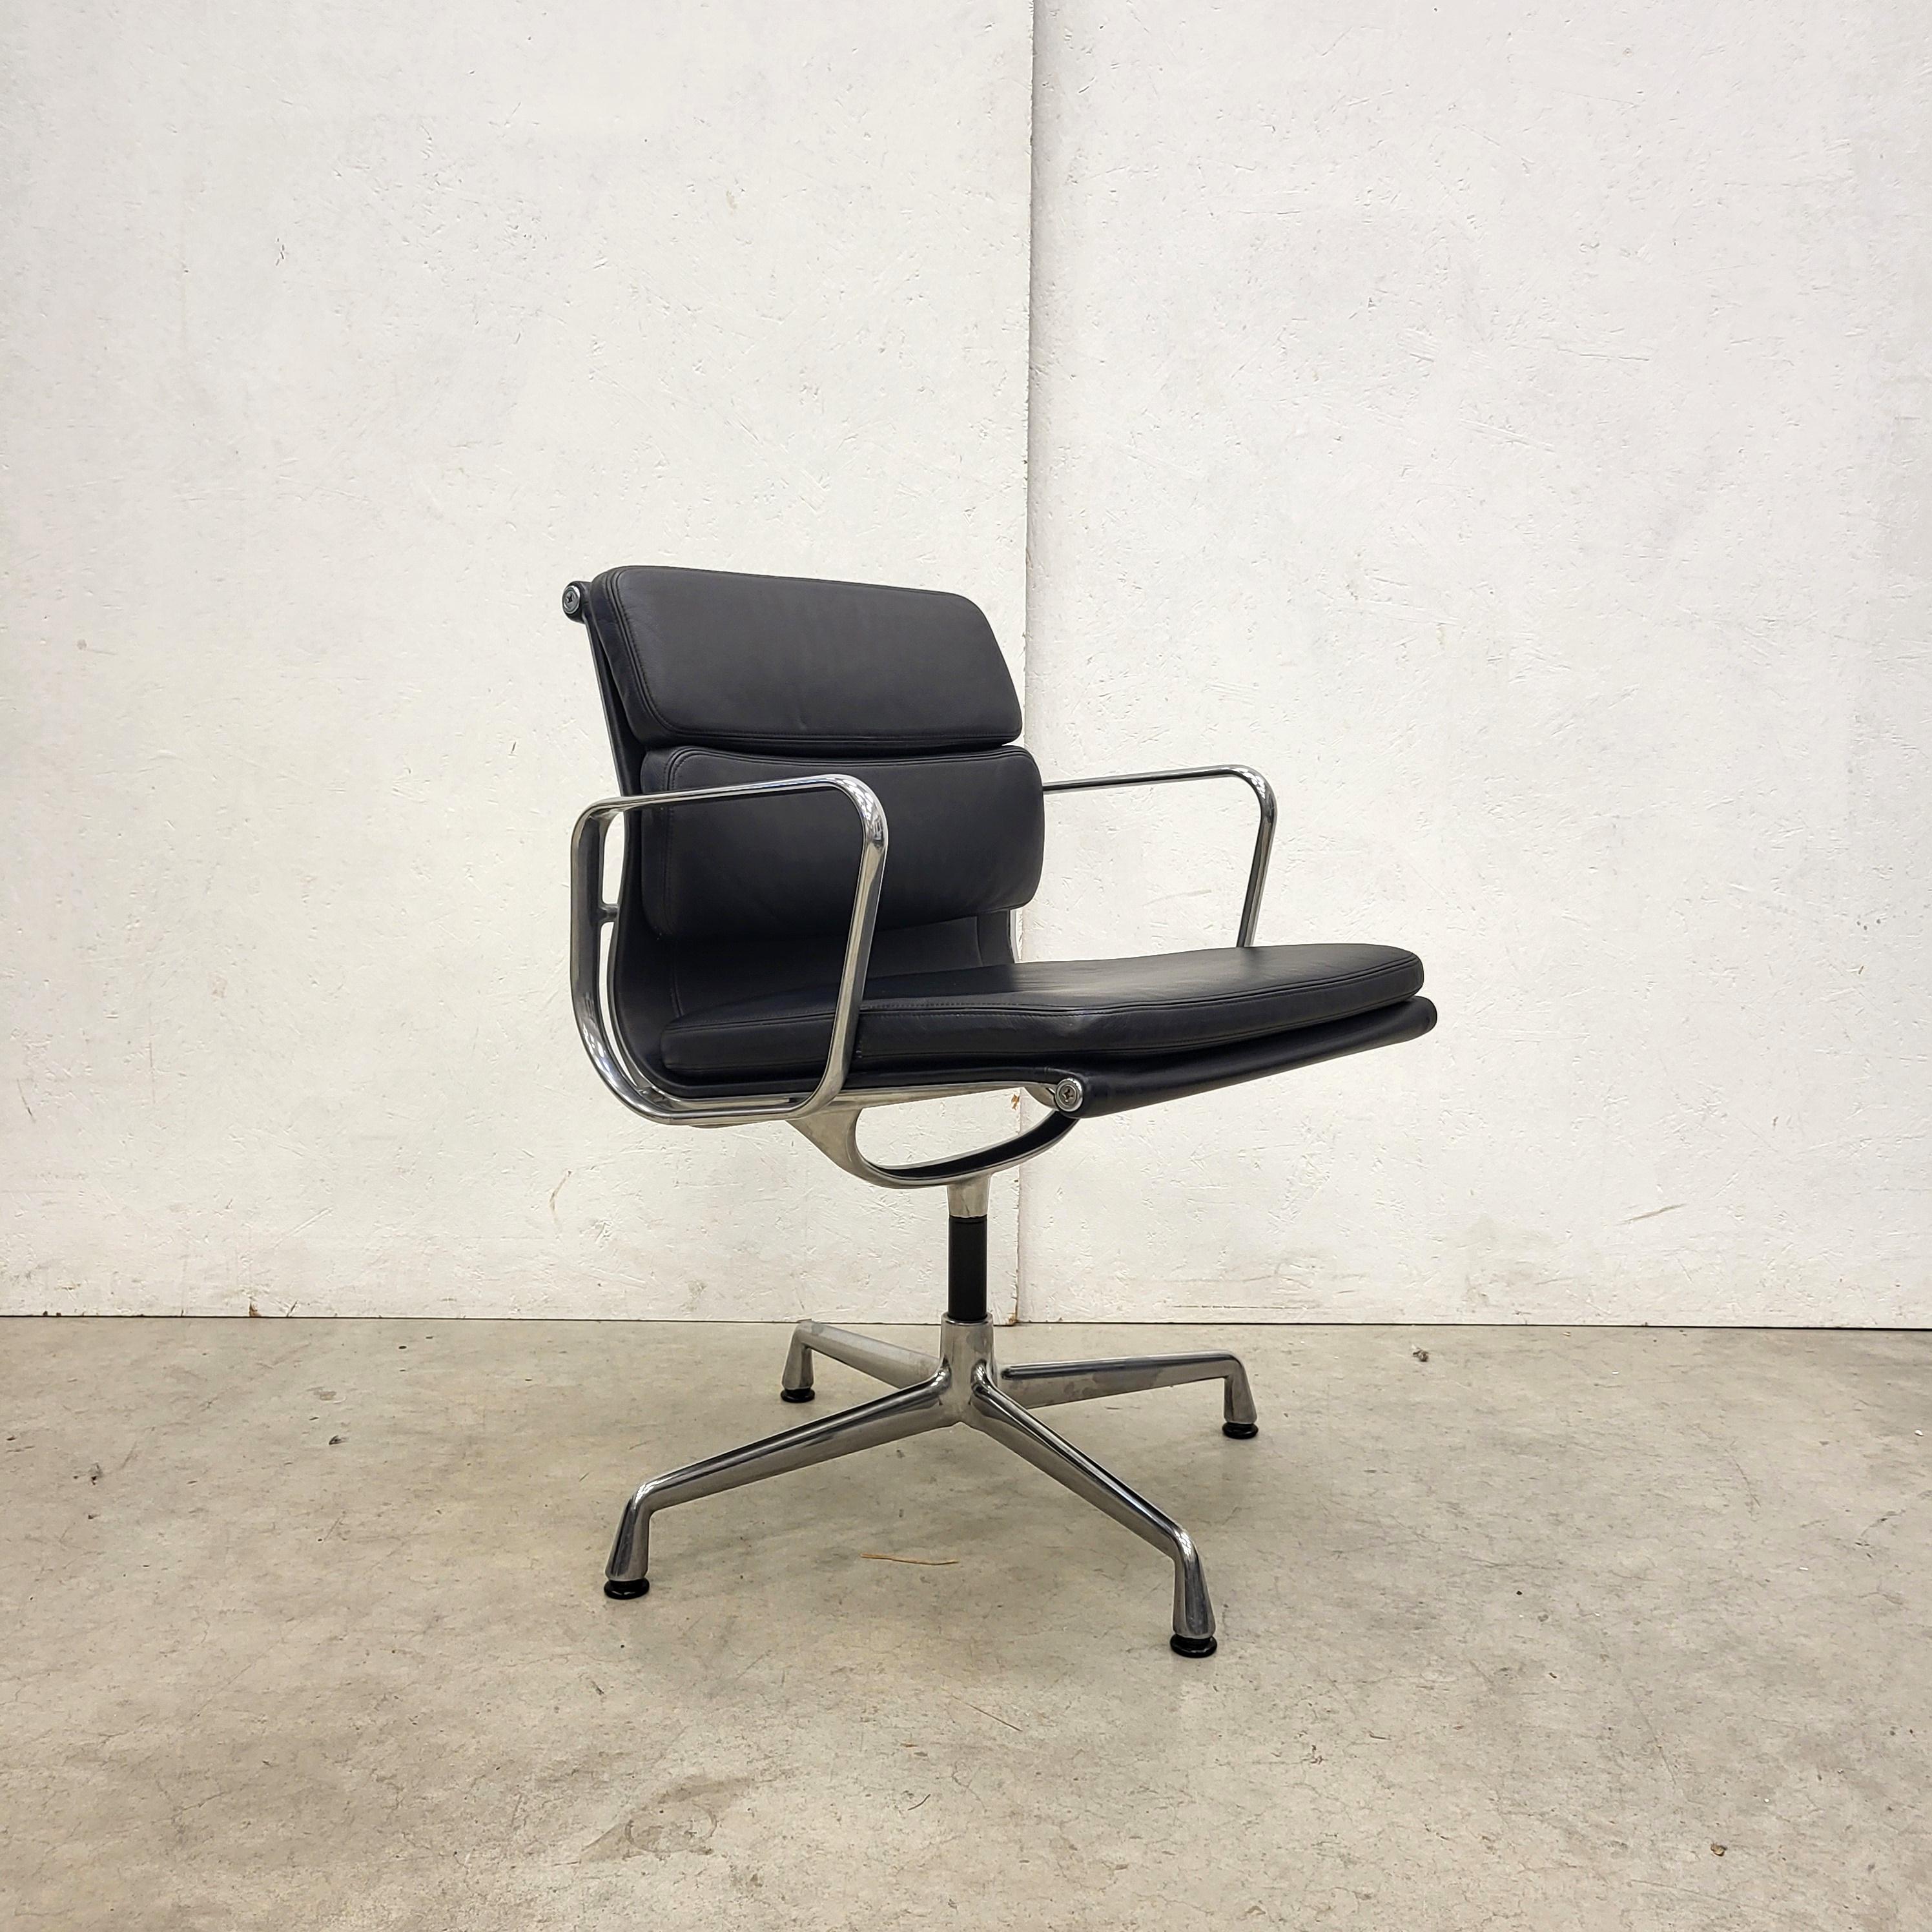 American 4x Vitra EA208 Soft Pad Office Chair by Charles Eames, 2006 Model